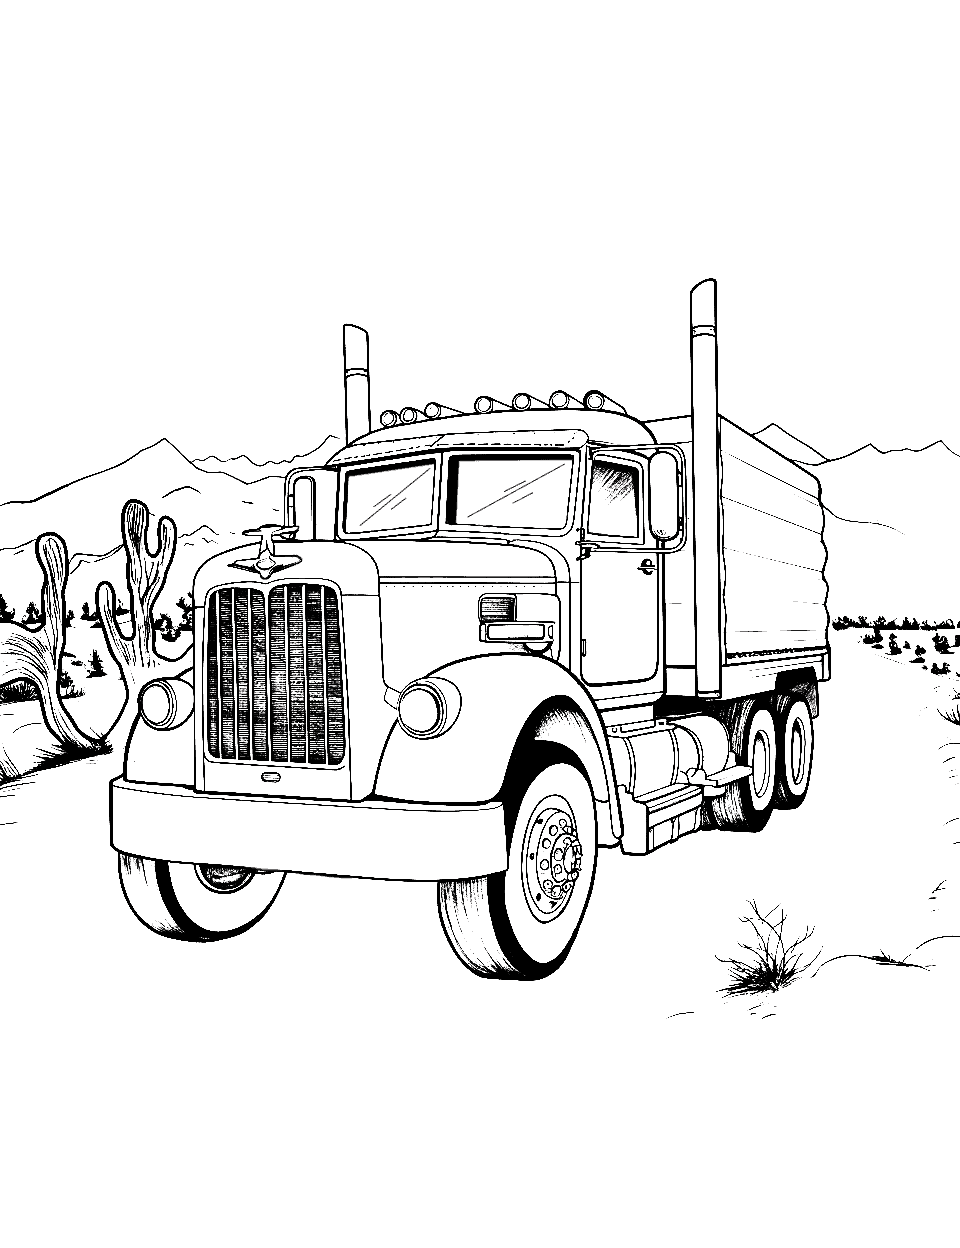 Peterbilt on a Mission Coloring Page - A robust Peterbilt truck driving through a desert with cacti around.